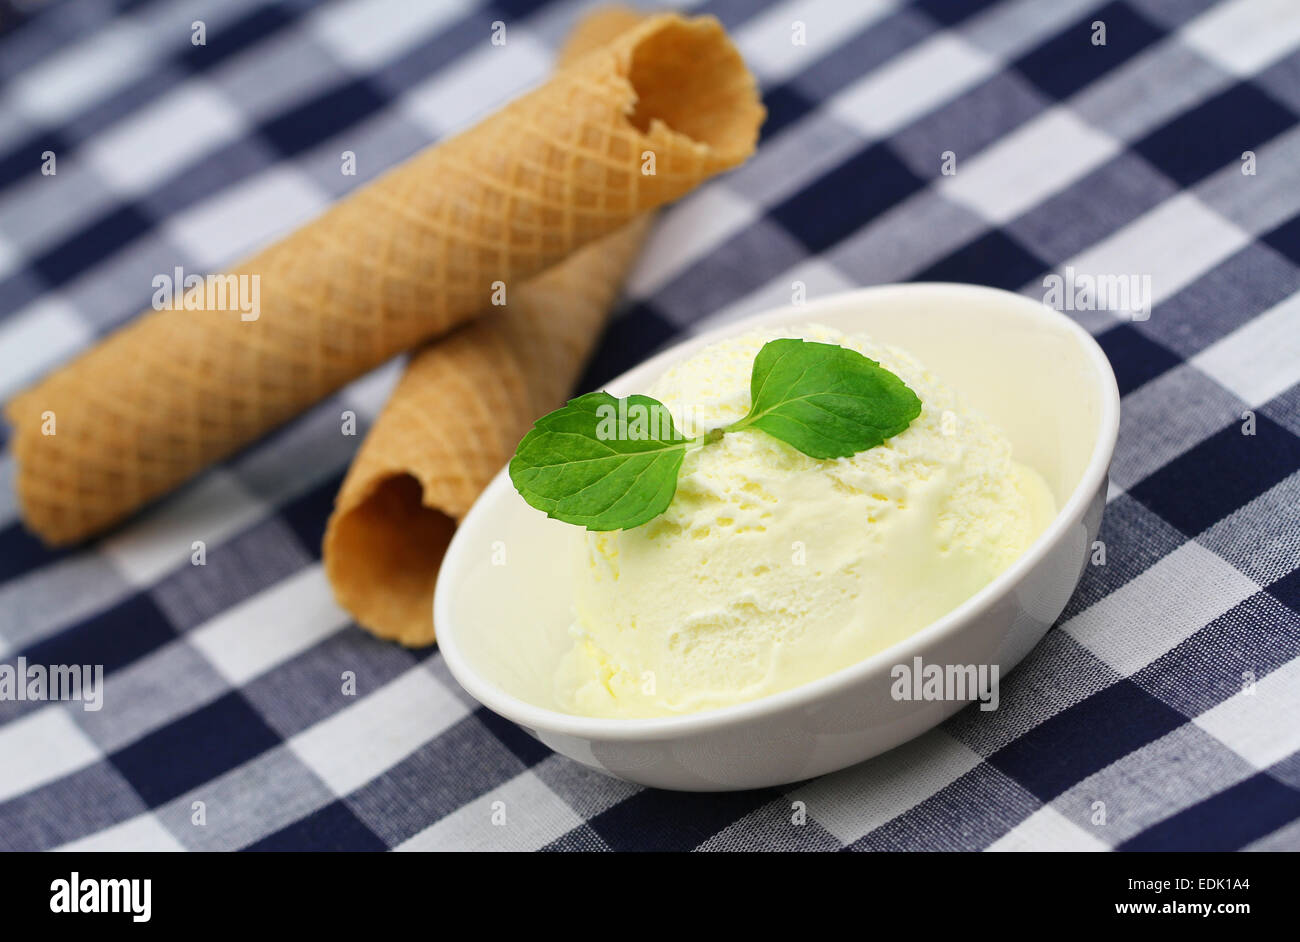 Vanilla ice cream garnished with organic mint and wafer on checkered cloth Stock Photo